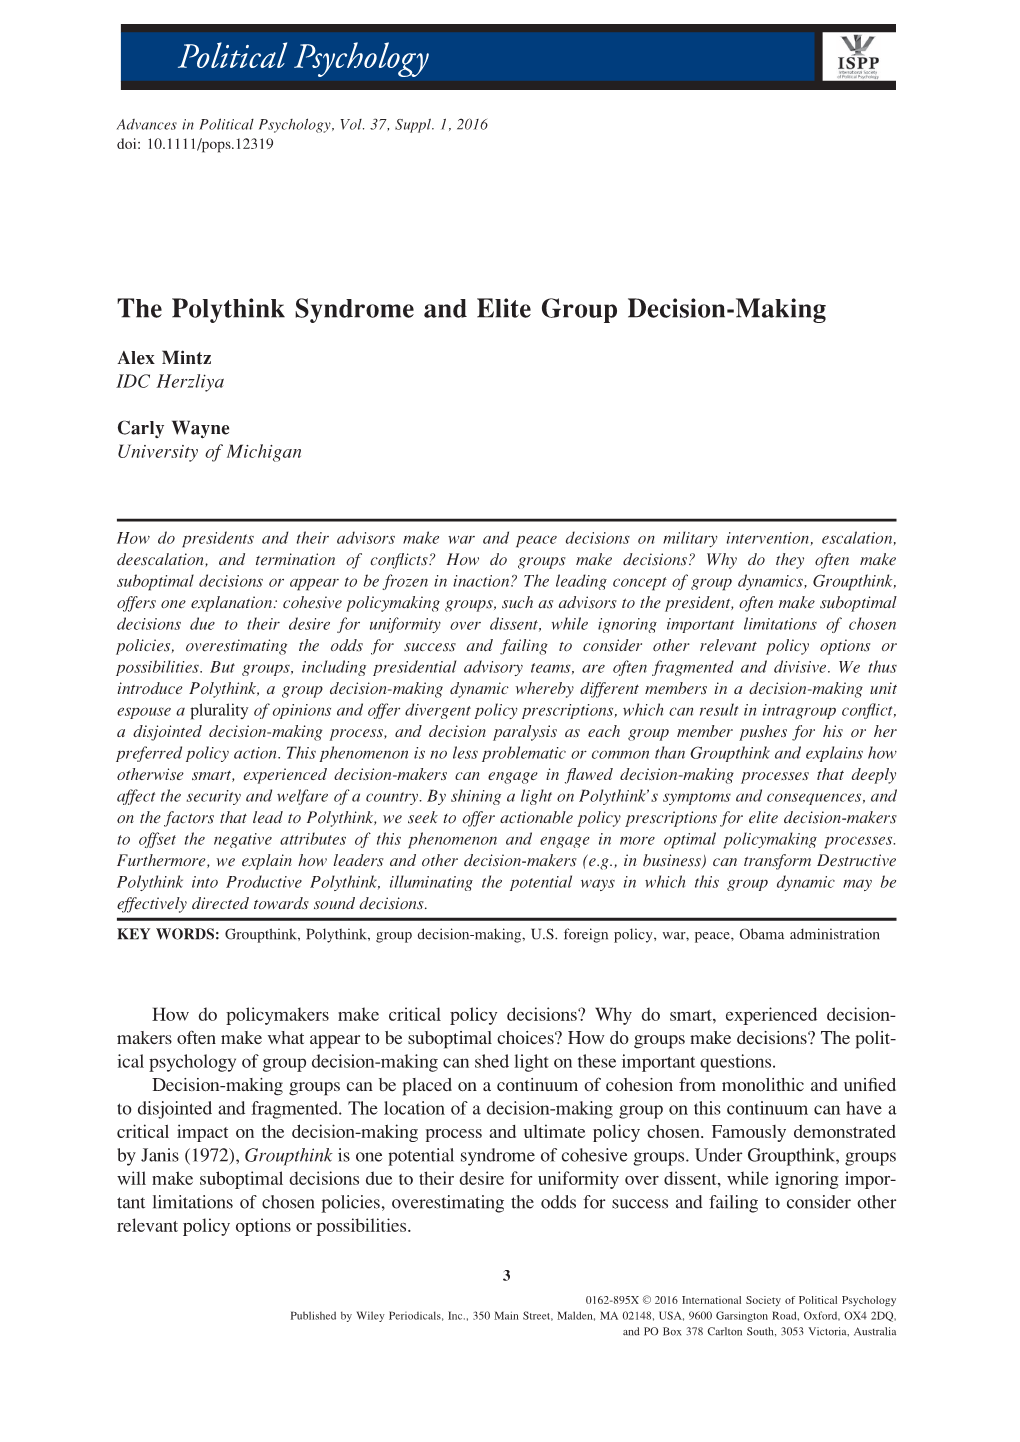 The Polythink Syndrome and Elite Group Decision&#8208;Making